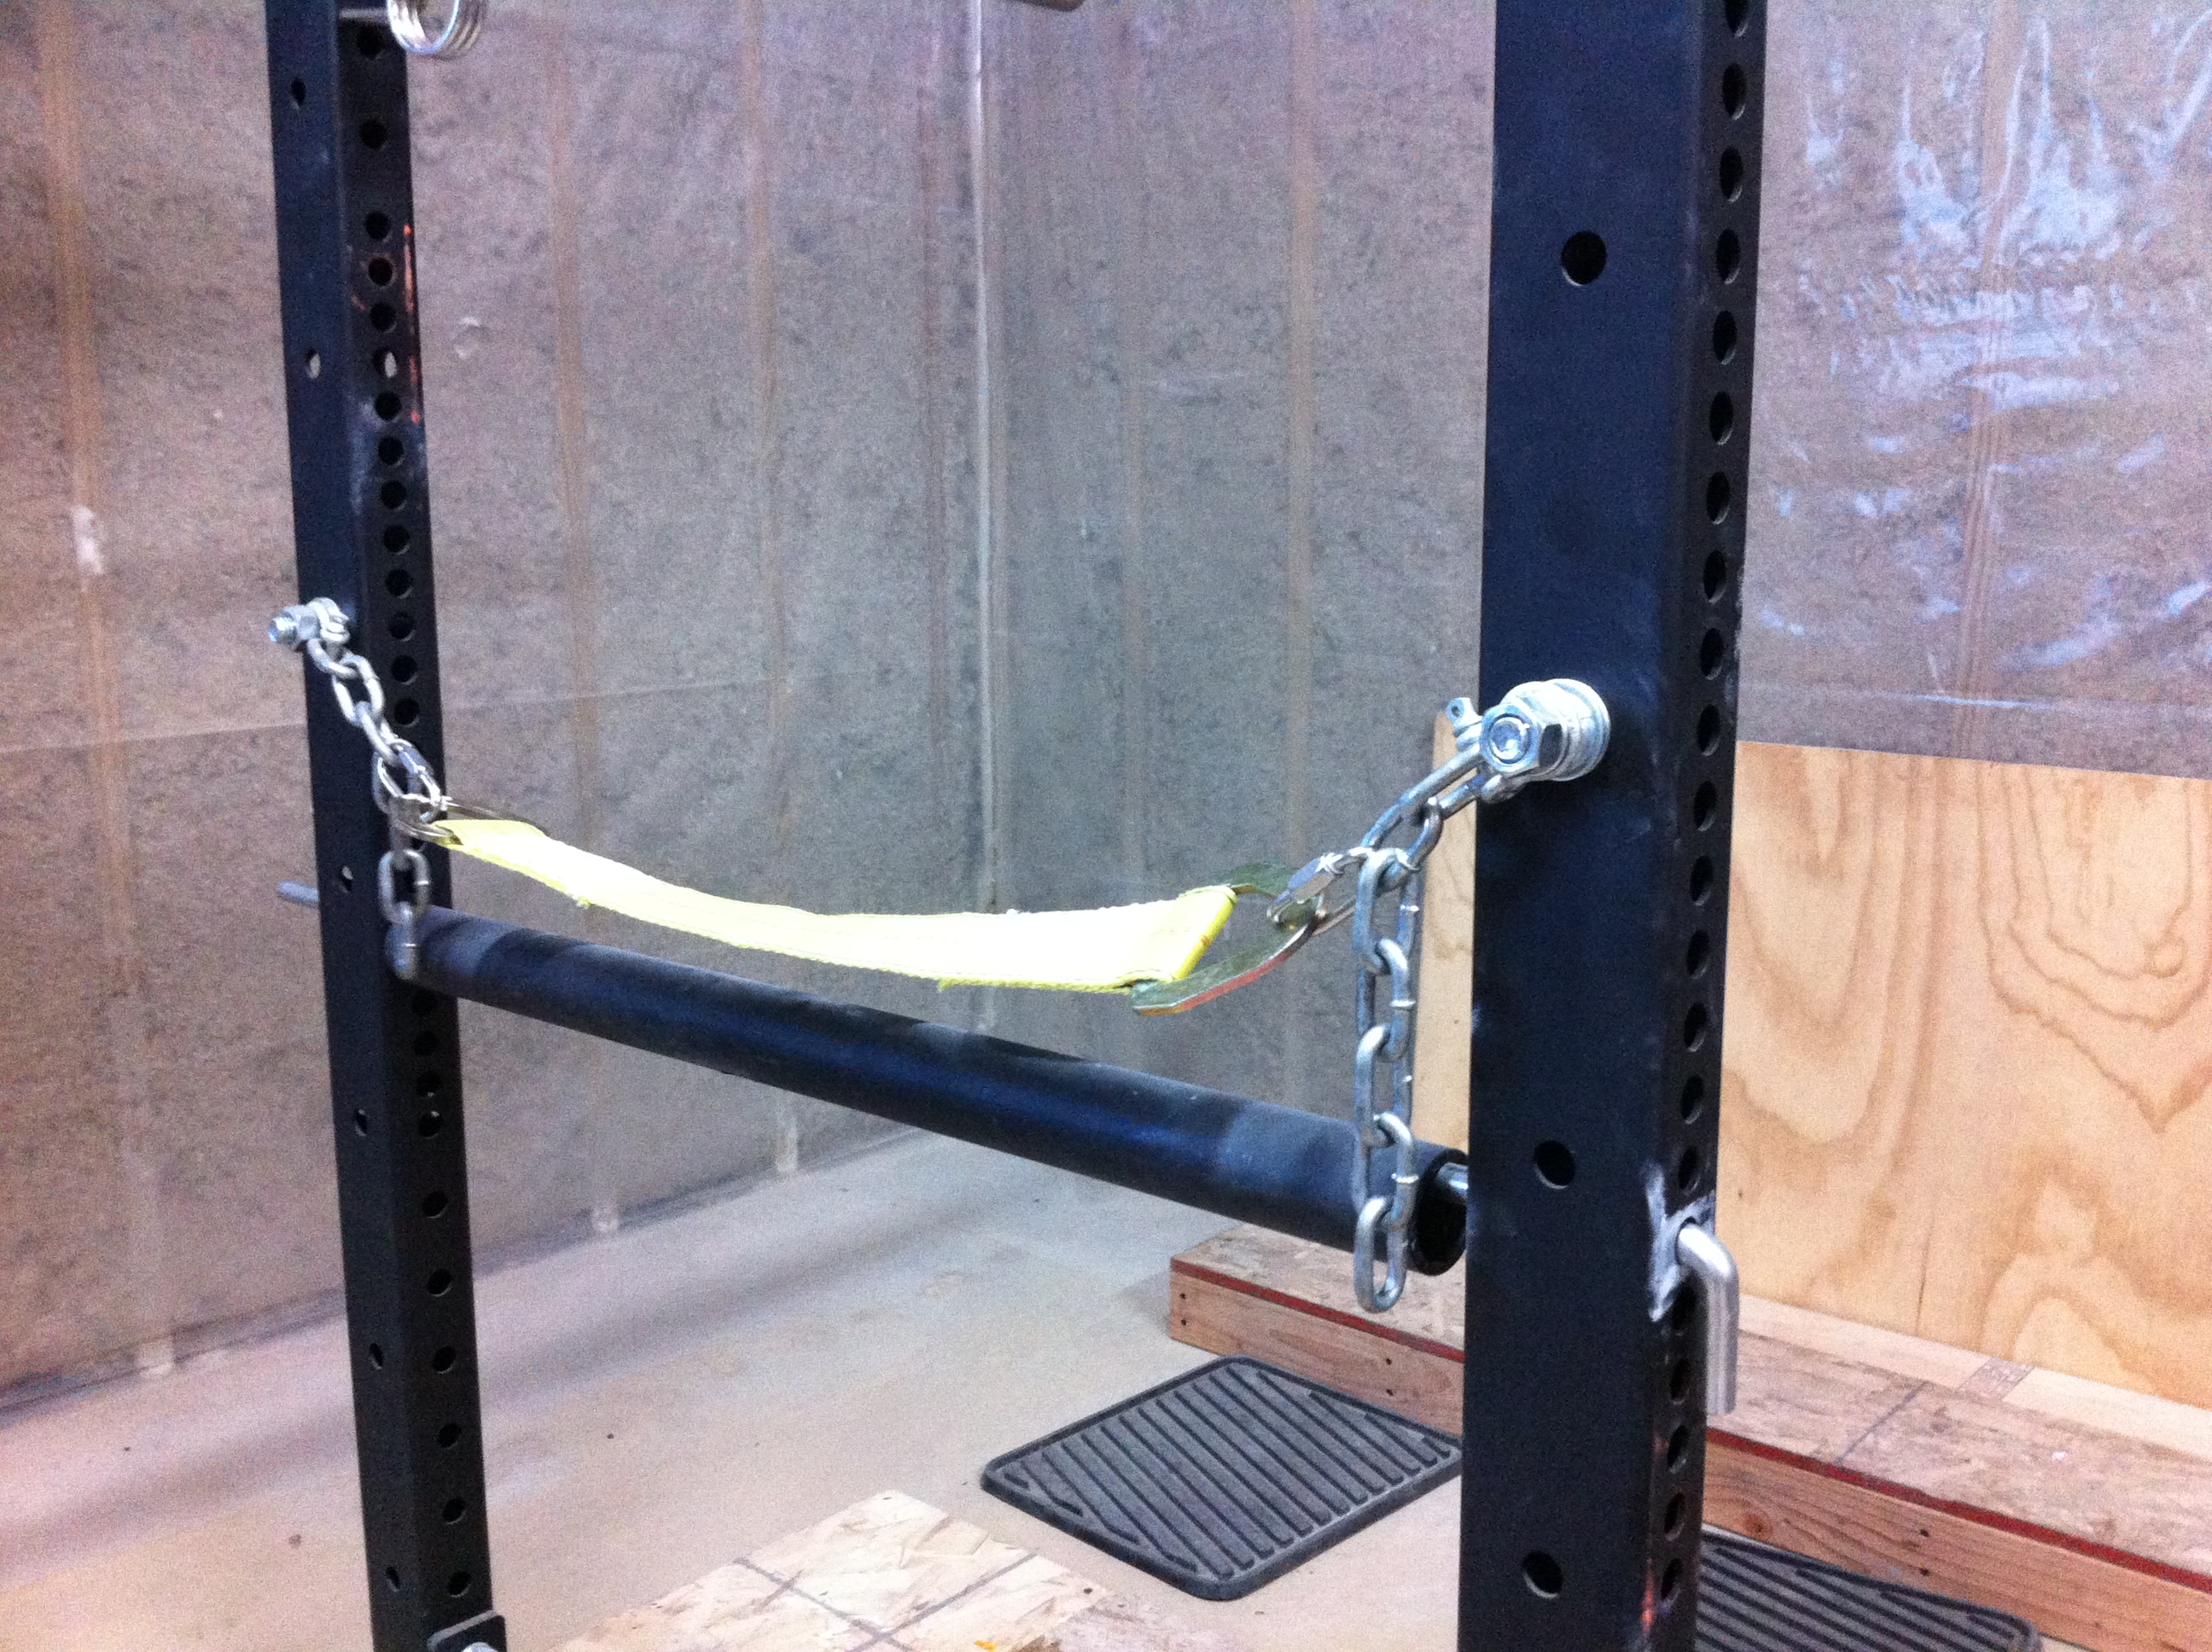 Example for safety pins and bands in a power rack